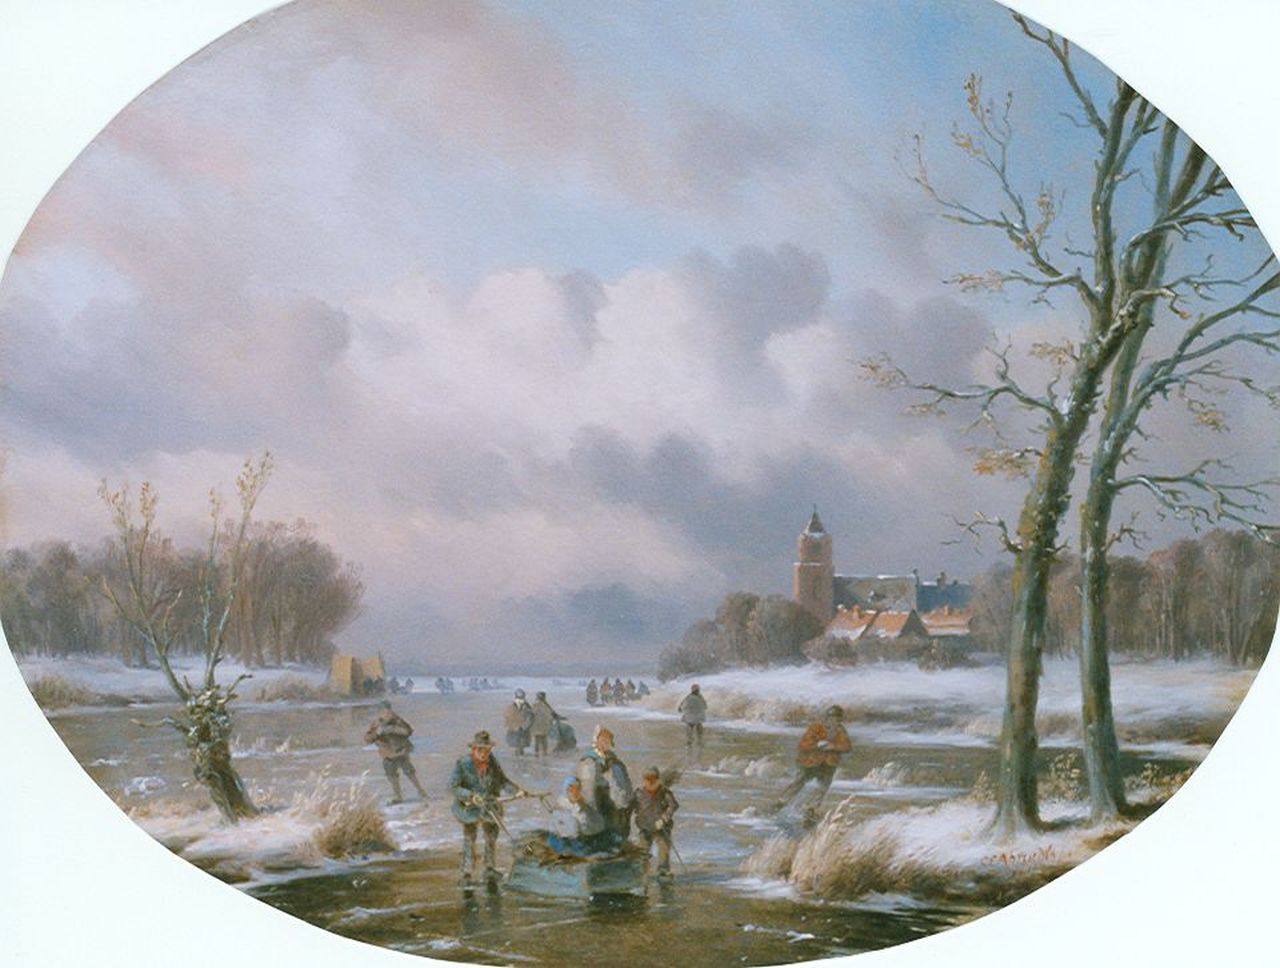 Ahrendts C.E.  | Carl Eduard Ahrendts, Skaters on the ice in winter, oil on panel 31.0 x 39.7 cm, signed l.r.